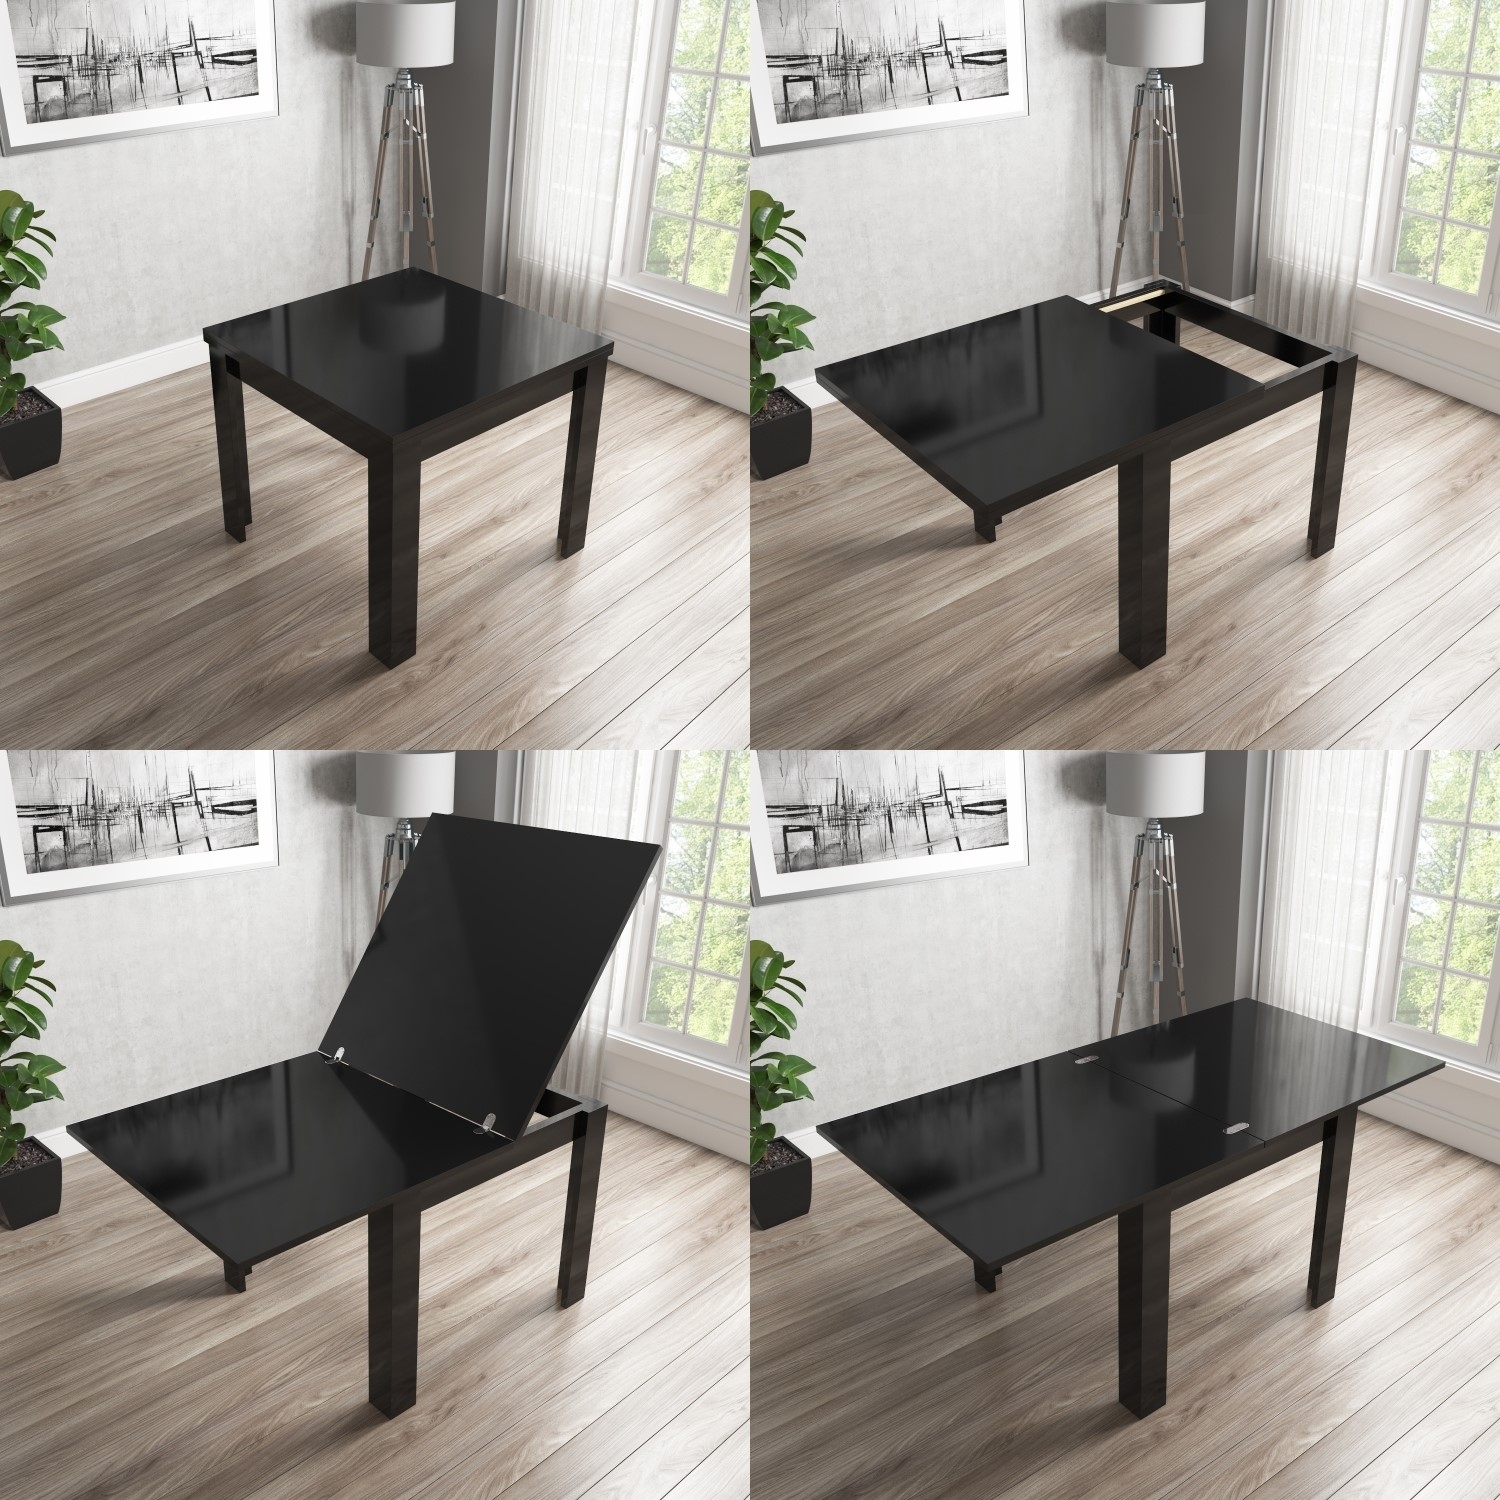 Flip Top Dining Table In Black High Gloss With 4 Slate Grey Chairs Vivienne New Haven Furniture123